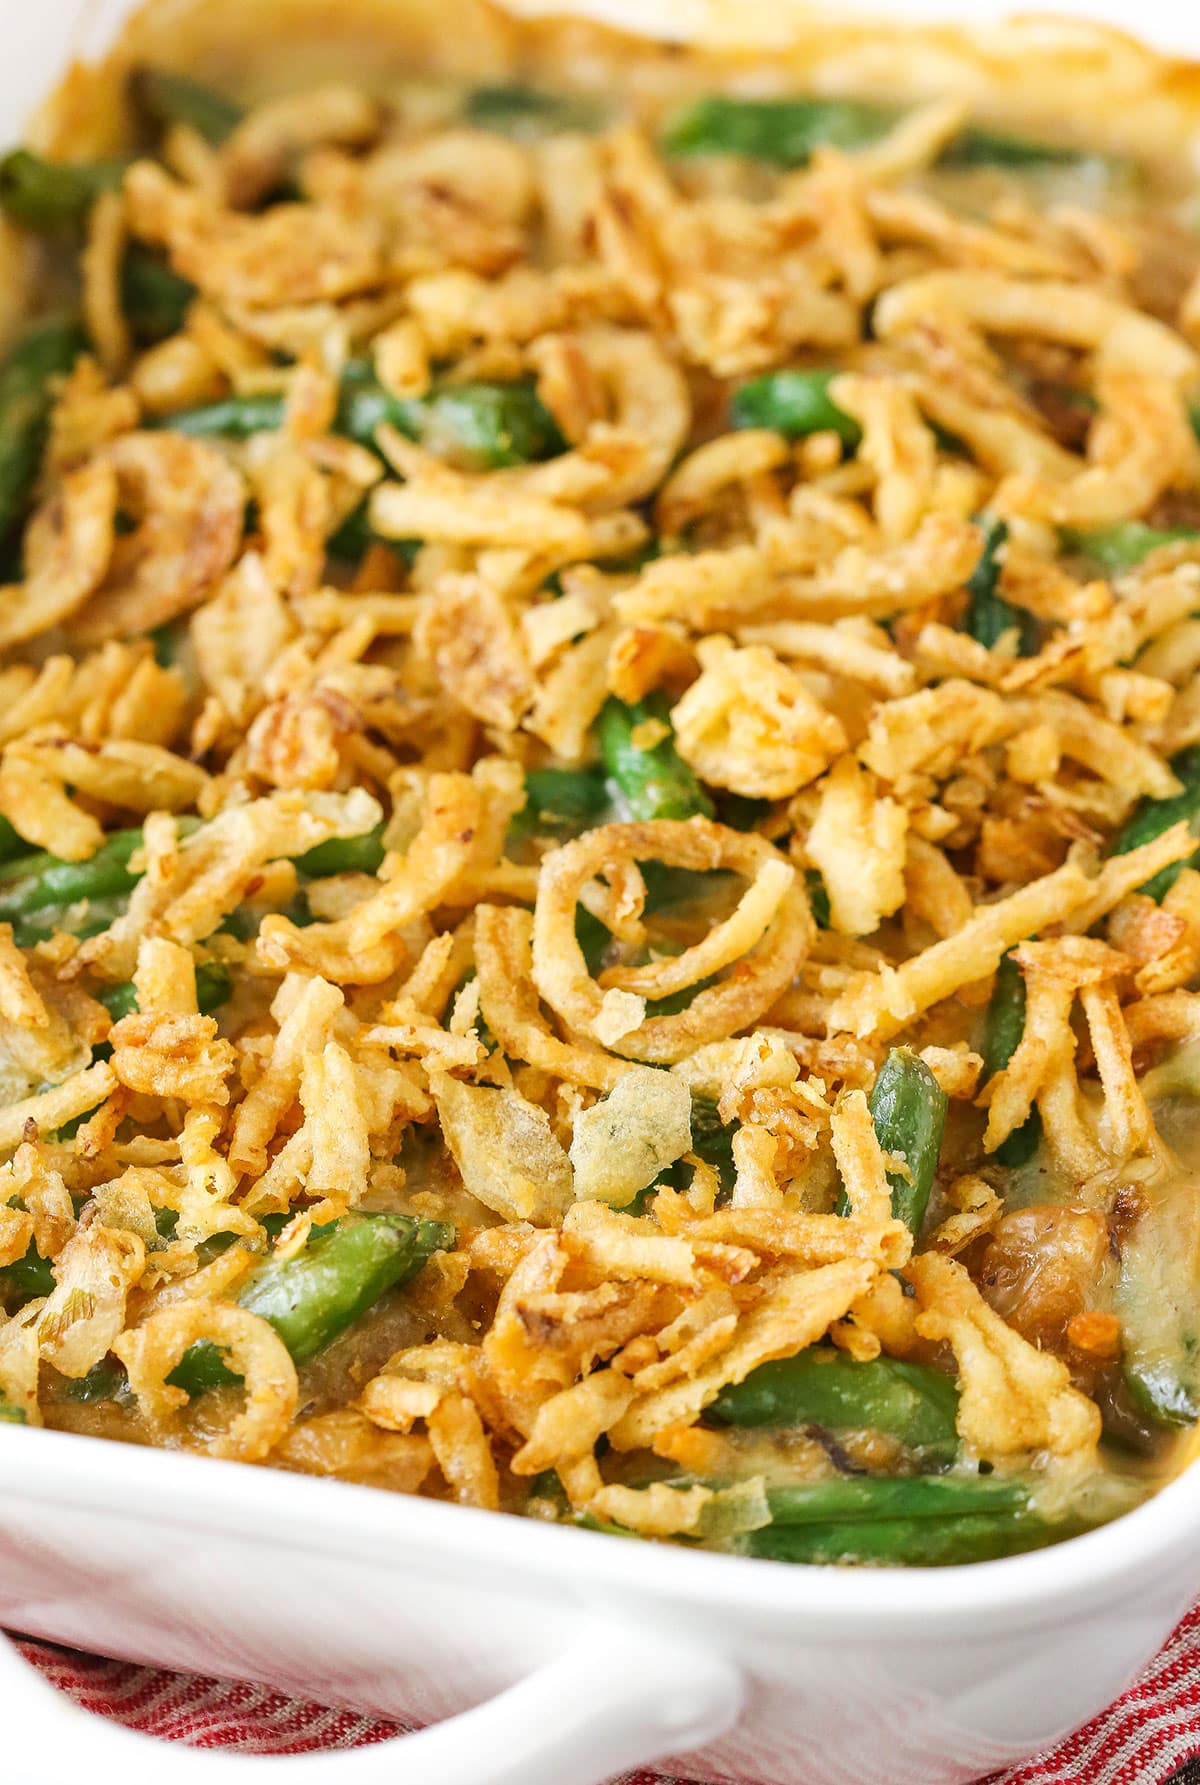 Campbell's green bean casserole with fried onions.